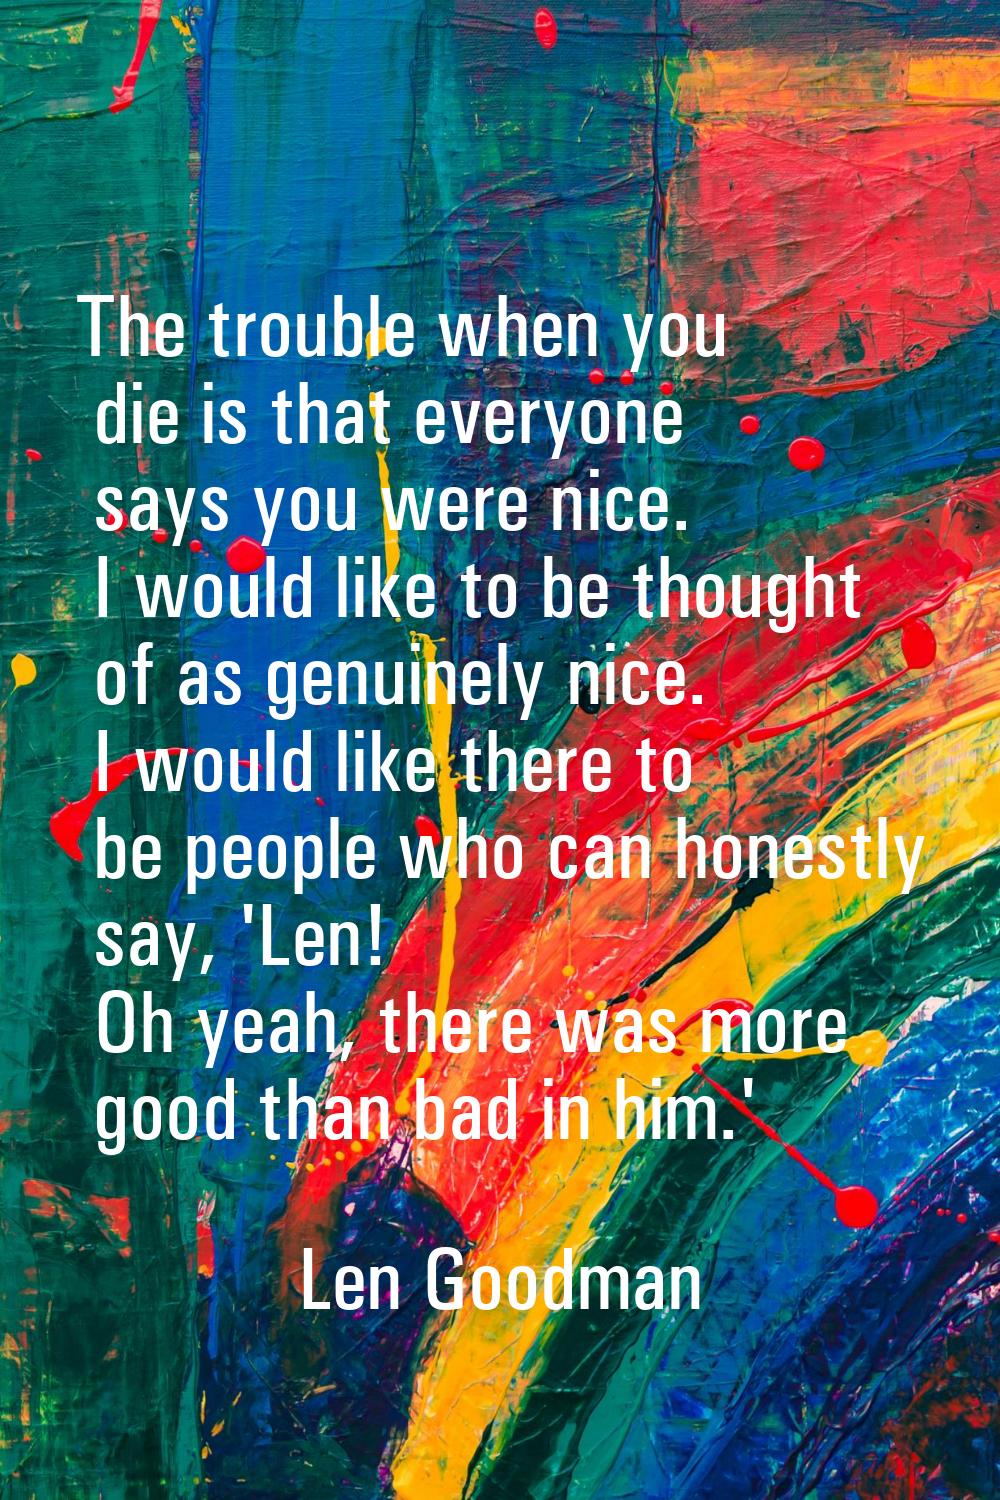 The trouble when you die is that everyone says you were nice. I would like to be thought of as genu